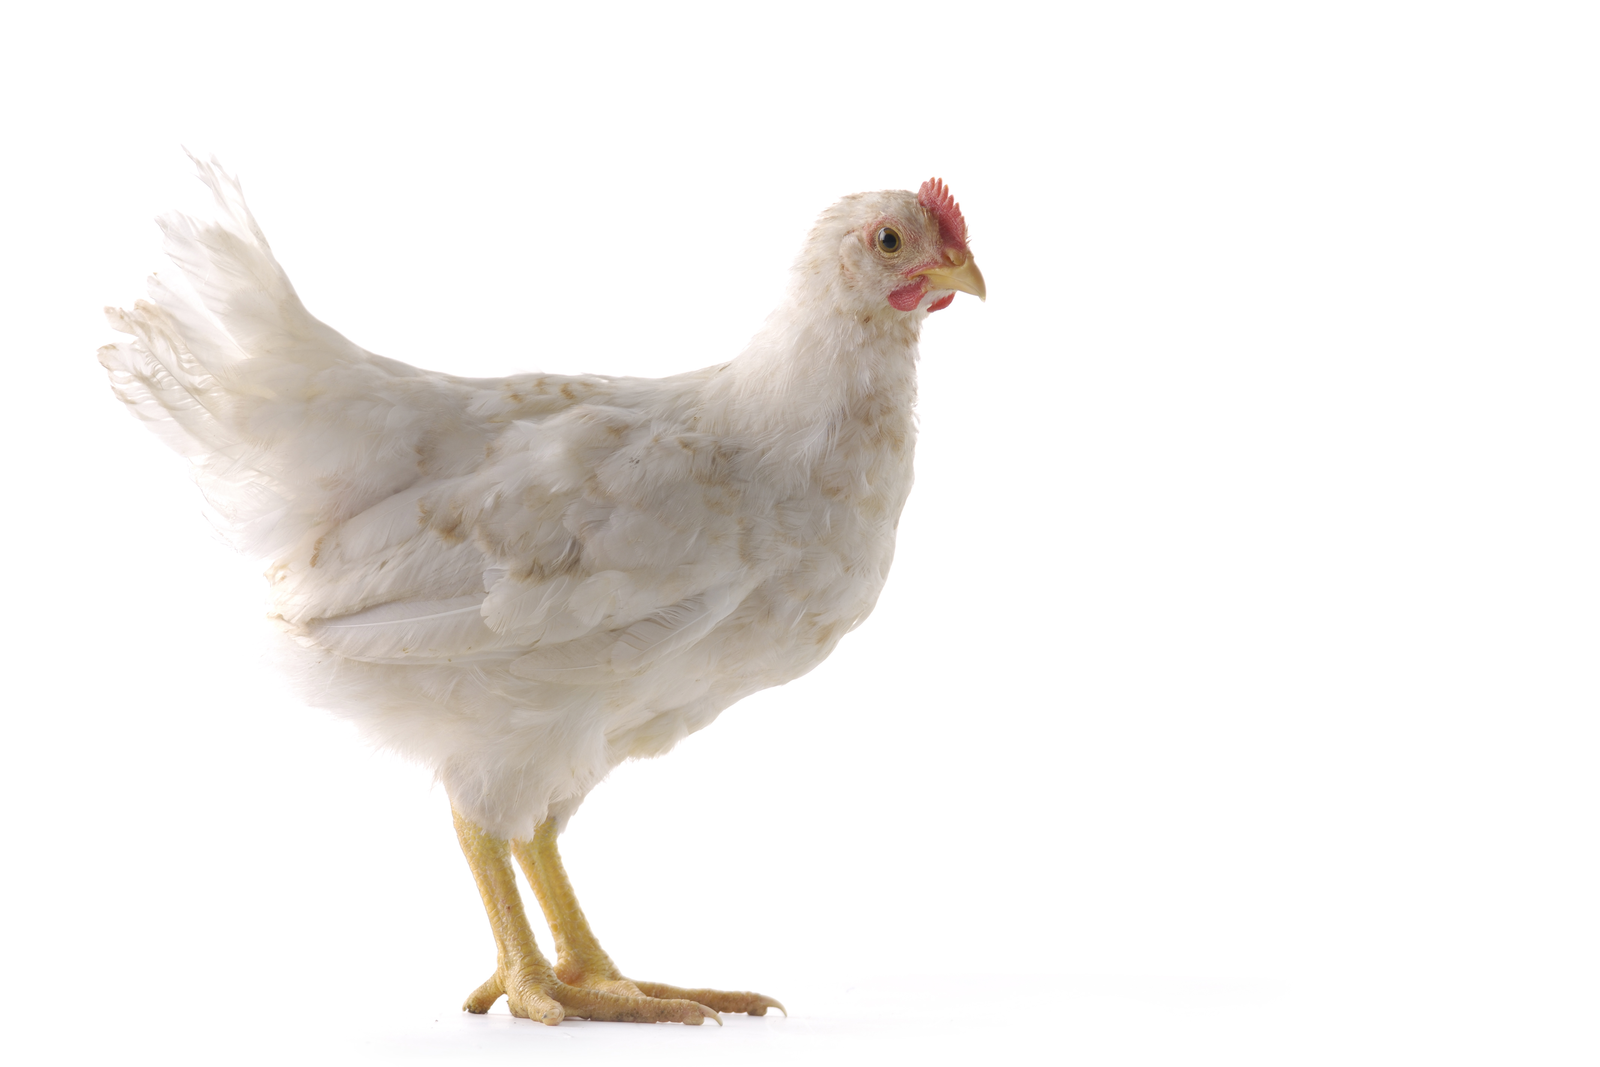 Peptides show promise for poultry